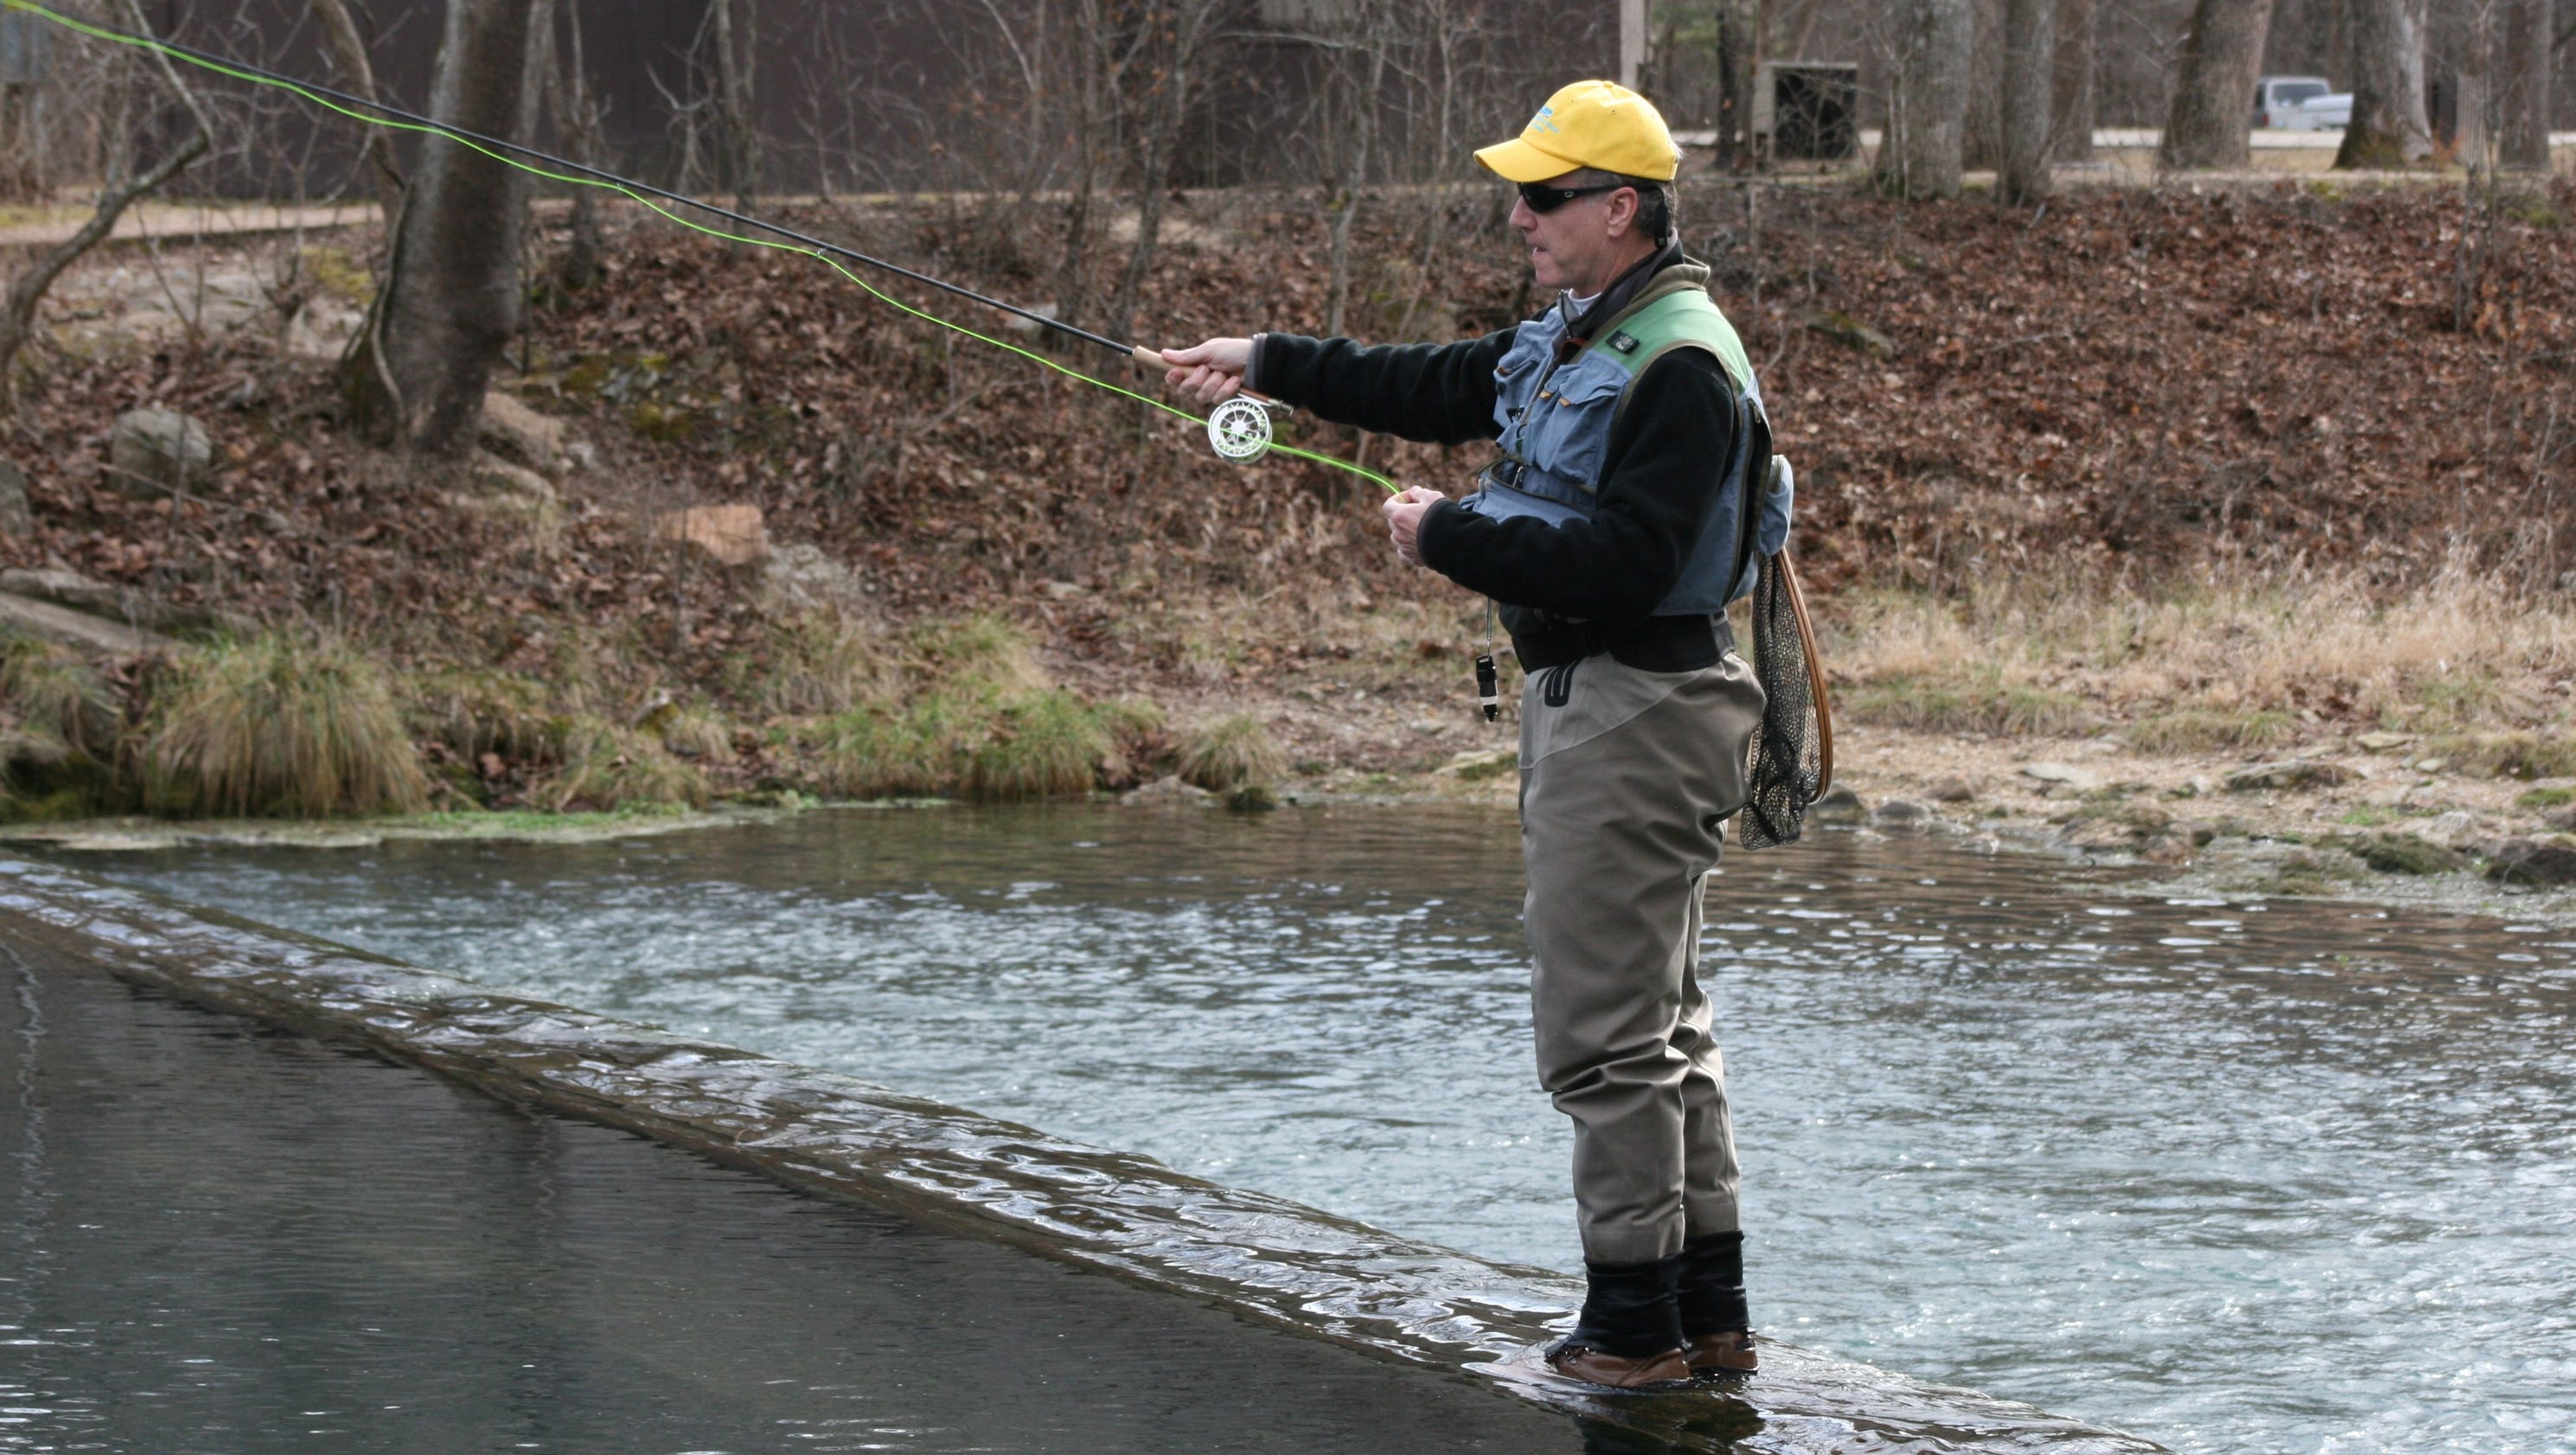 Winter fishing: Trout run year-round at this Mo. park3200 x 1680